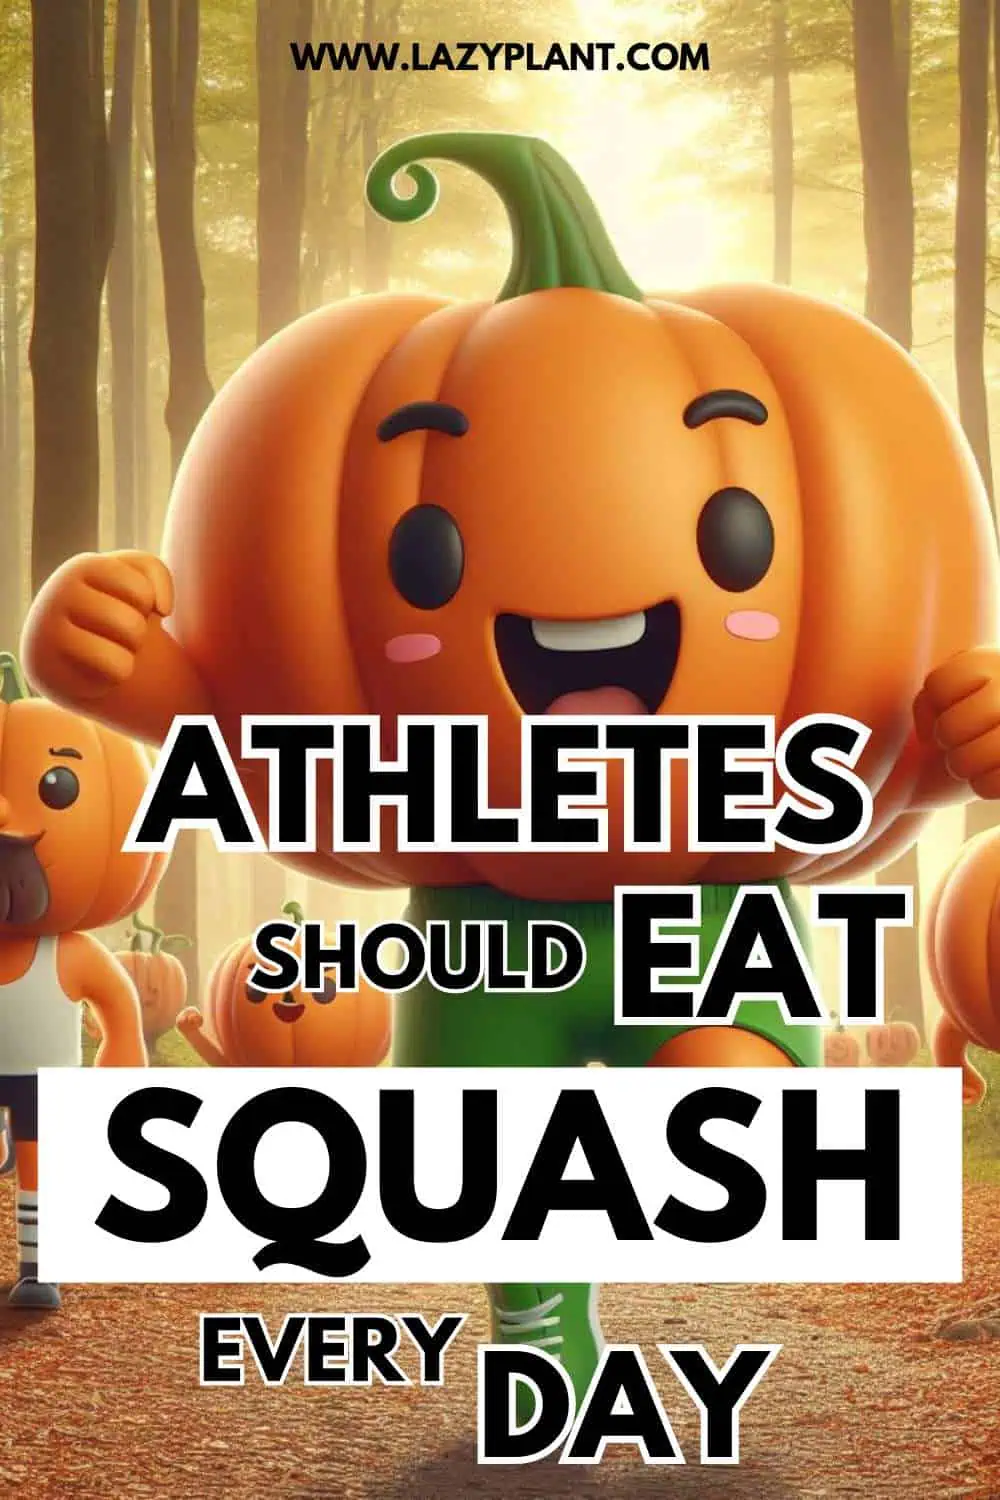 Benefits of Squash for Sports performance